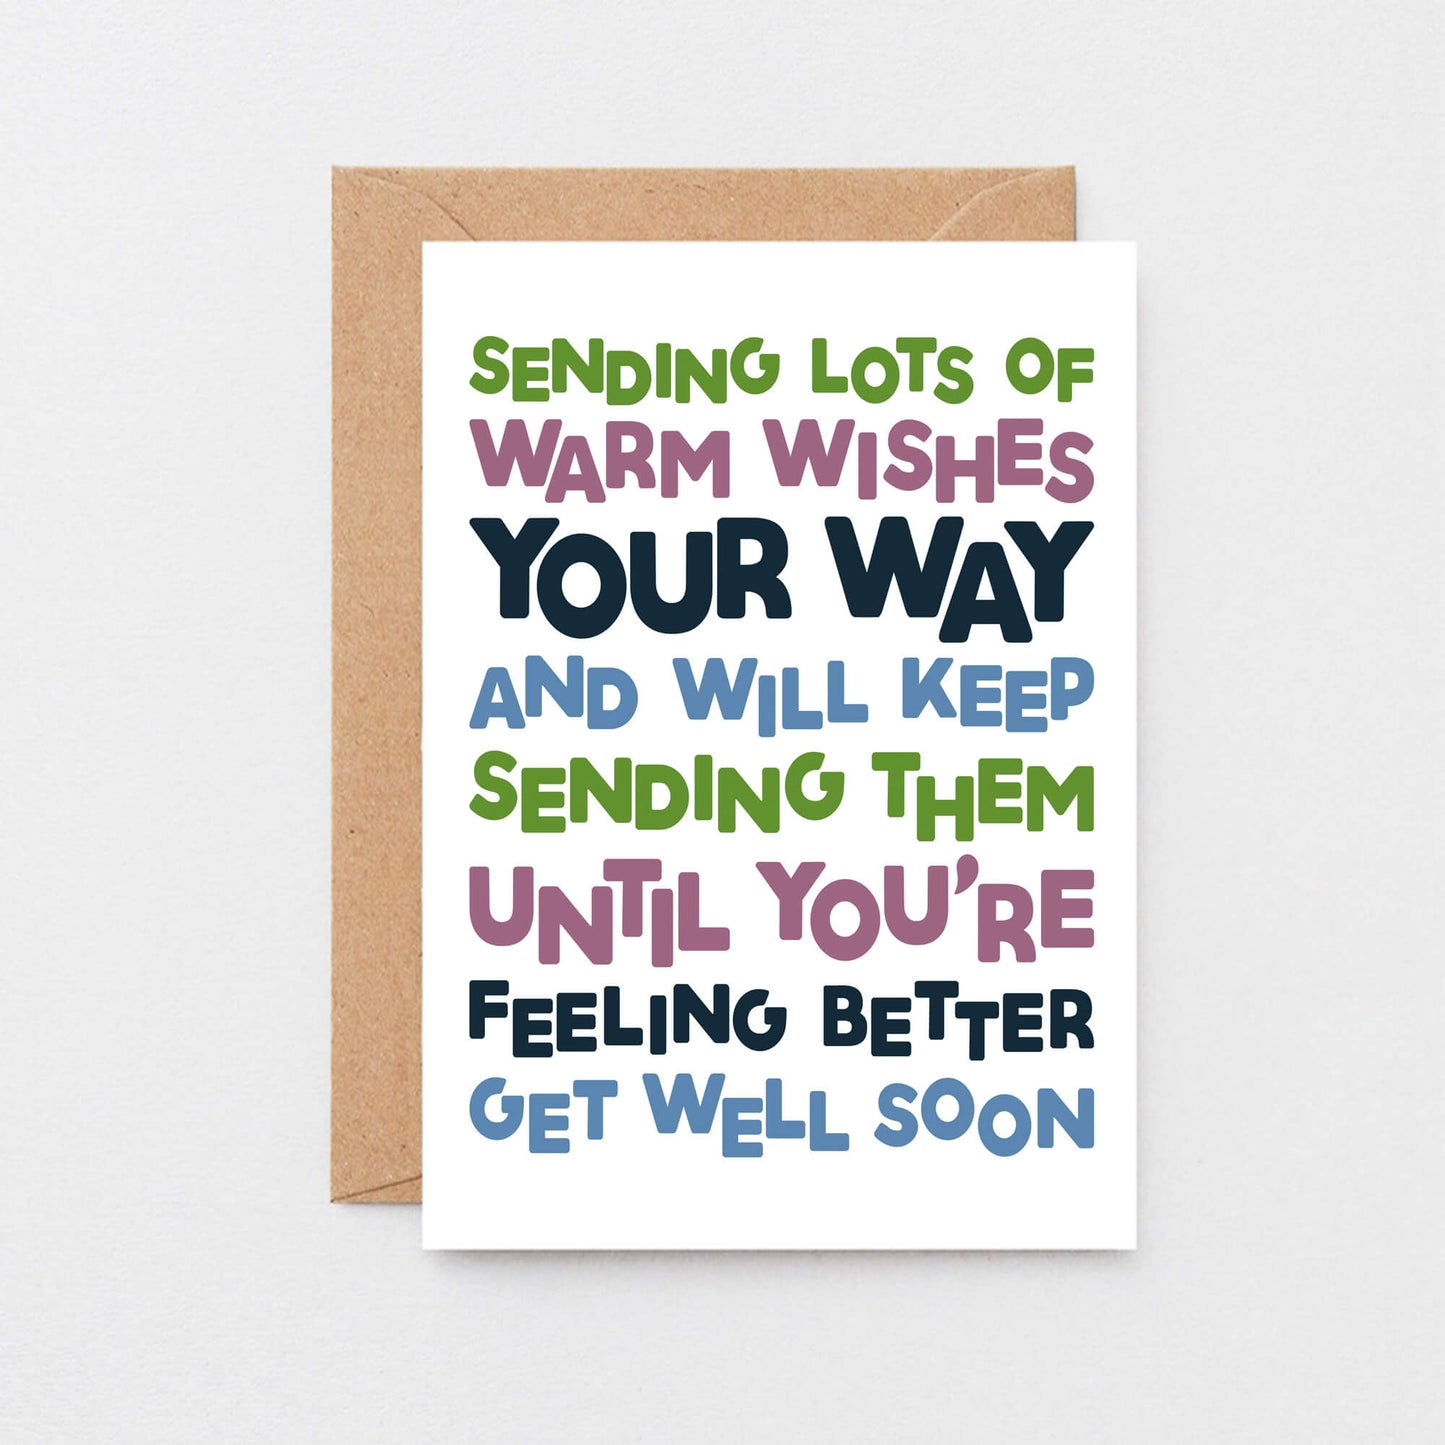 Get Well Card by SixElevenCreations. Reads Sending lots of warm wishes your way and will keep sending them until you're feeling better. Get well soon. Product Code SE0708A6